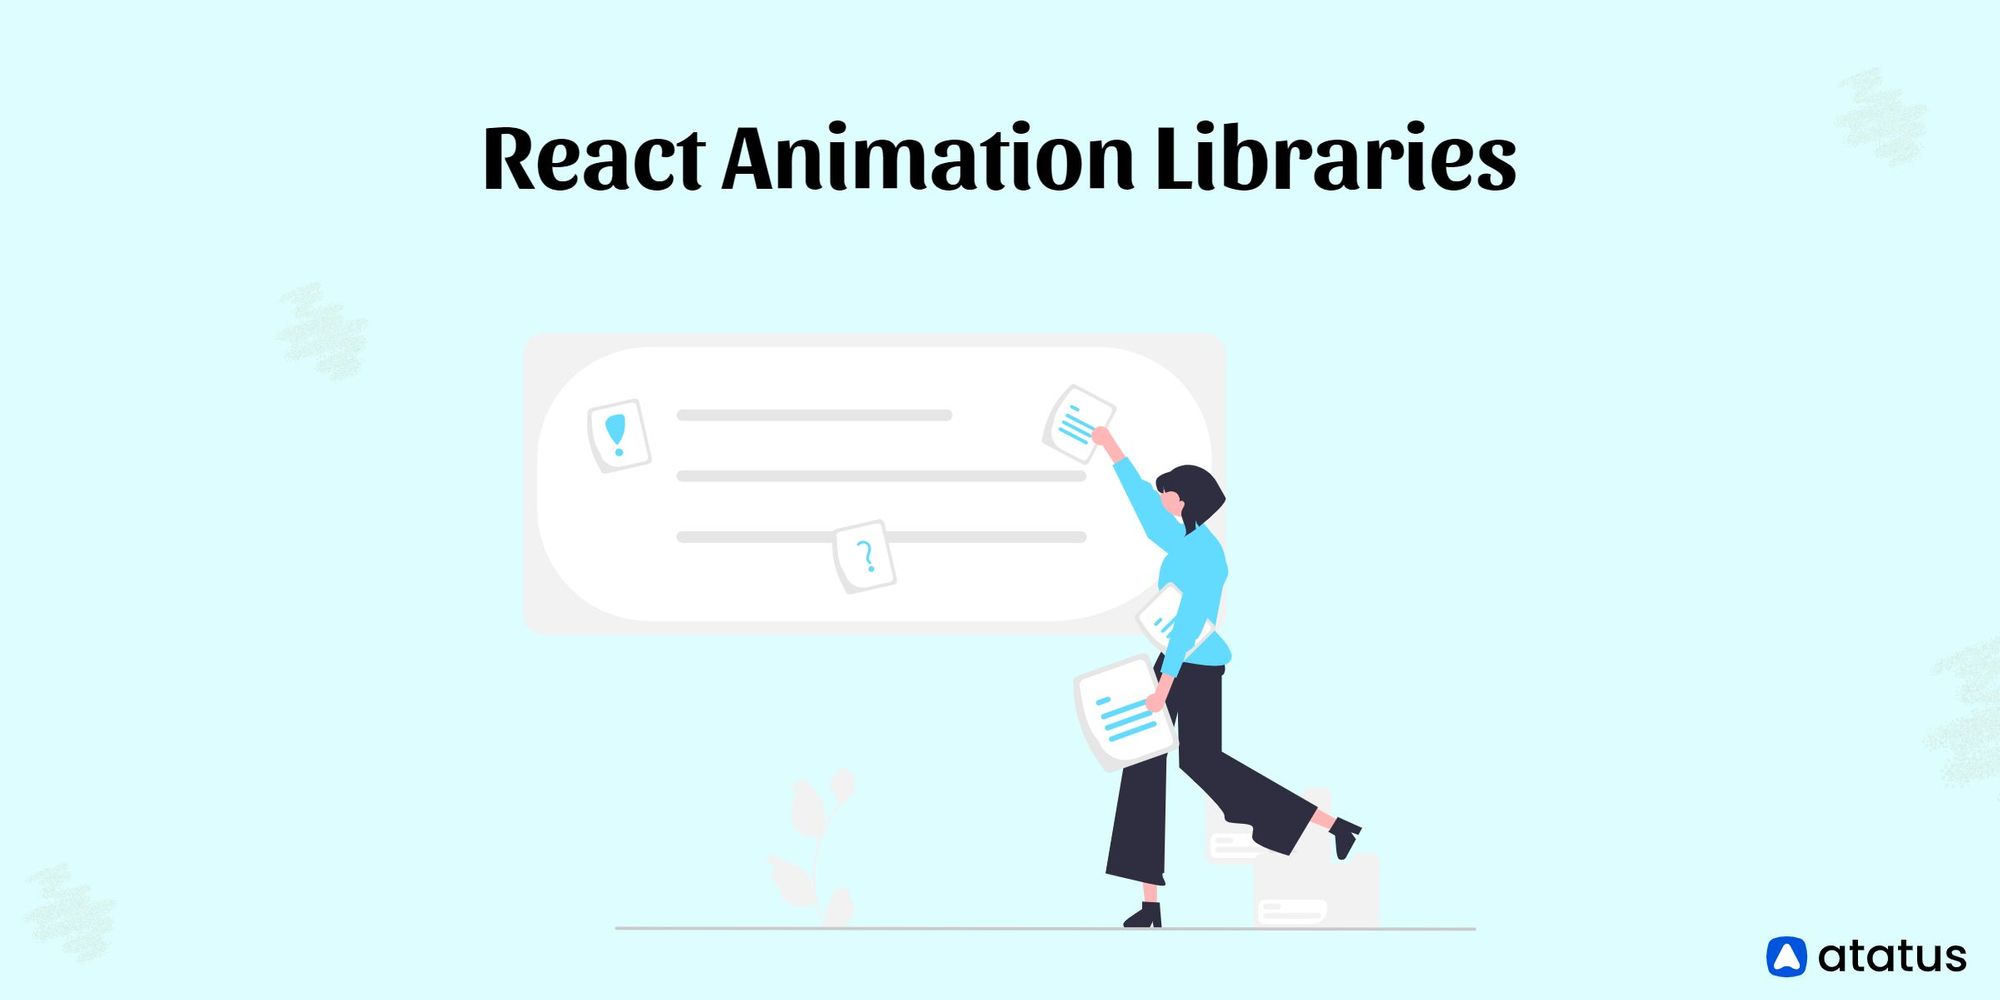 7 Useful React Animation Libraries for Web Development